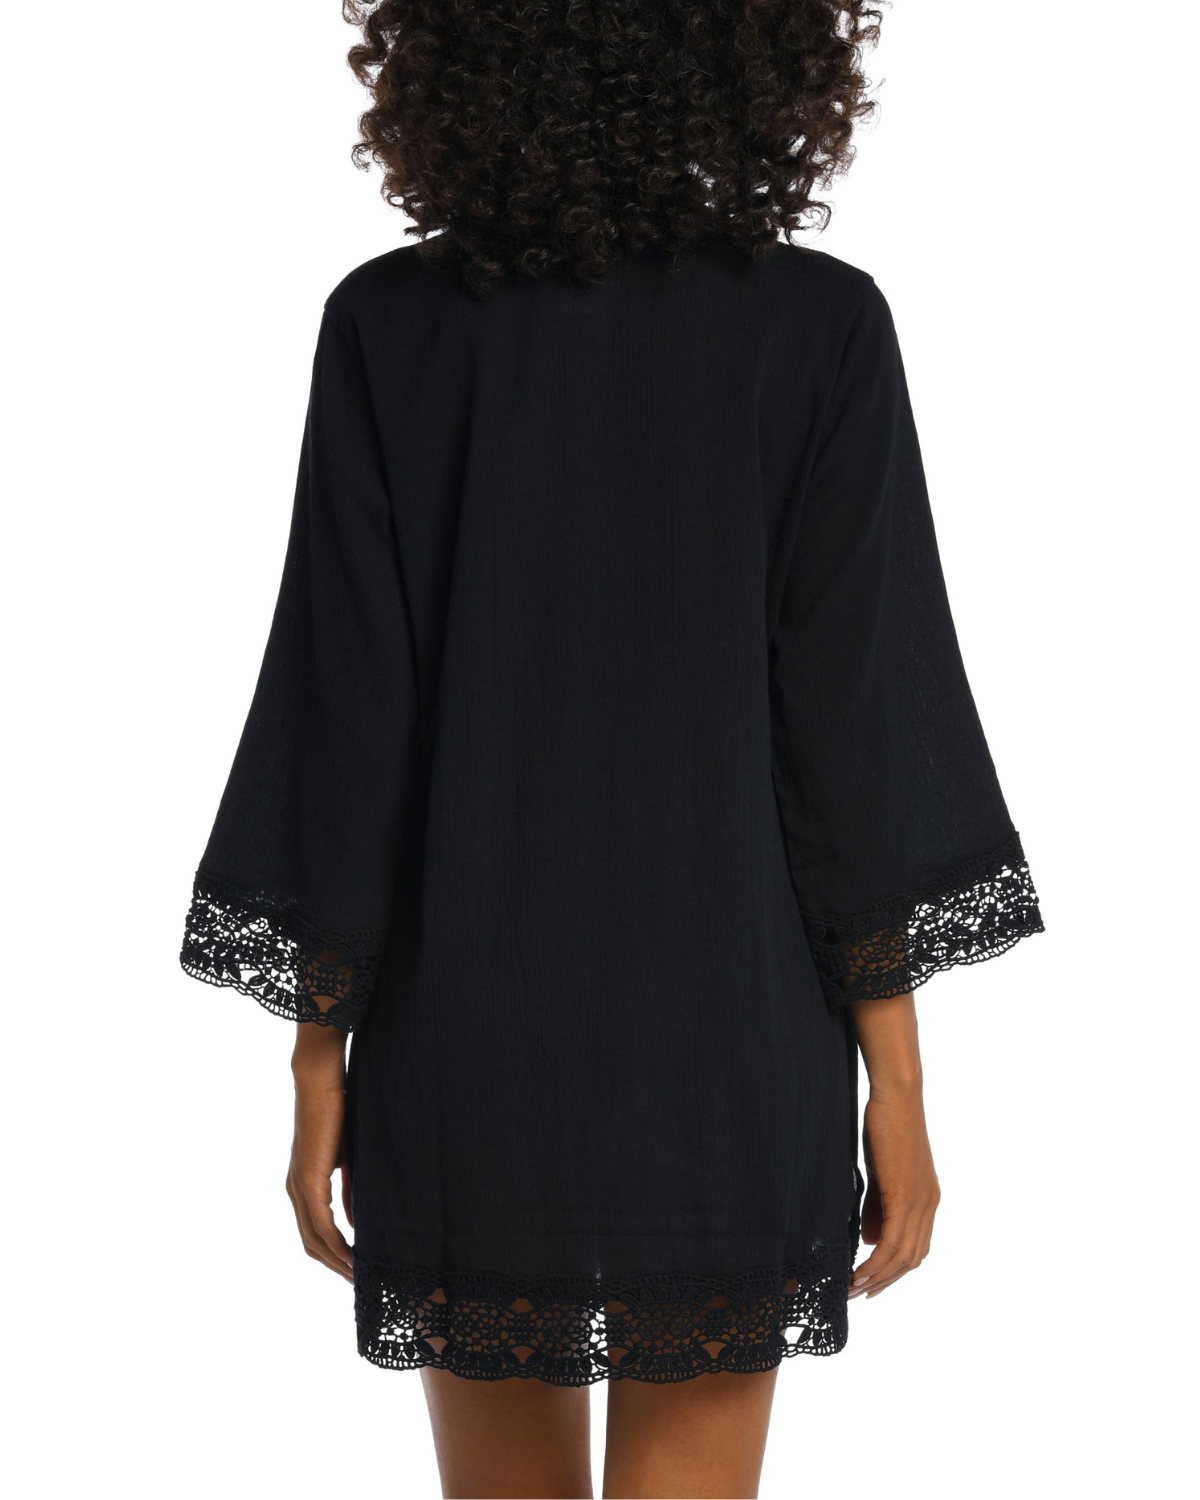 Model wearing a 3/4 sleeve v-neck tunic with a crochet trim in black